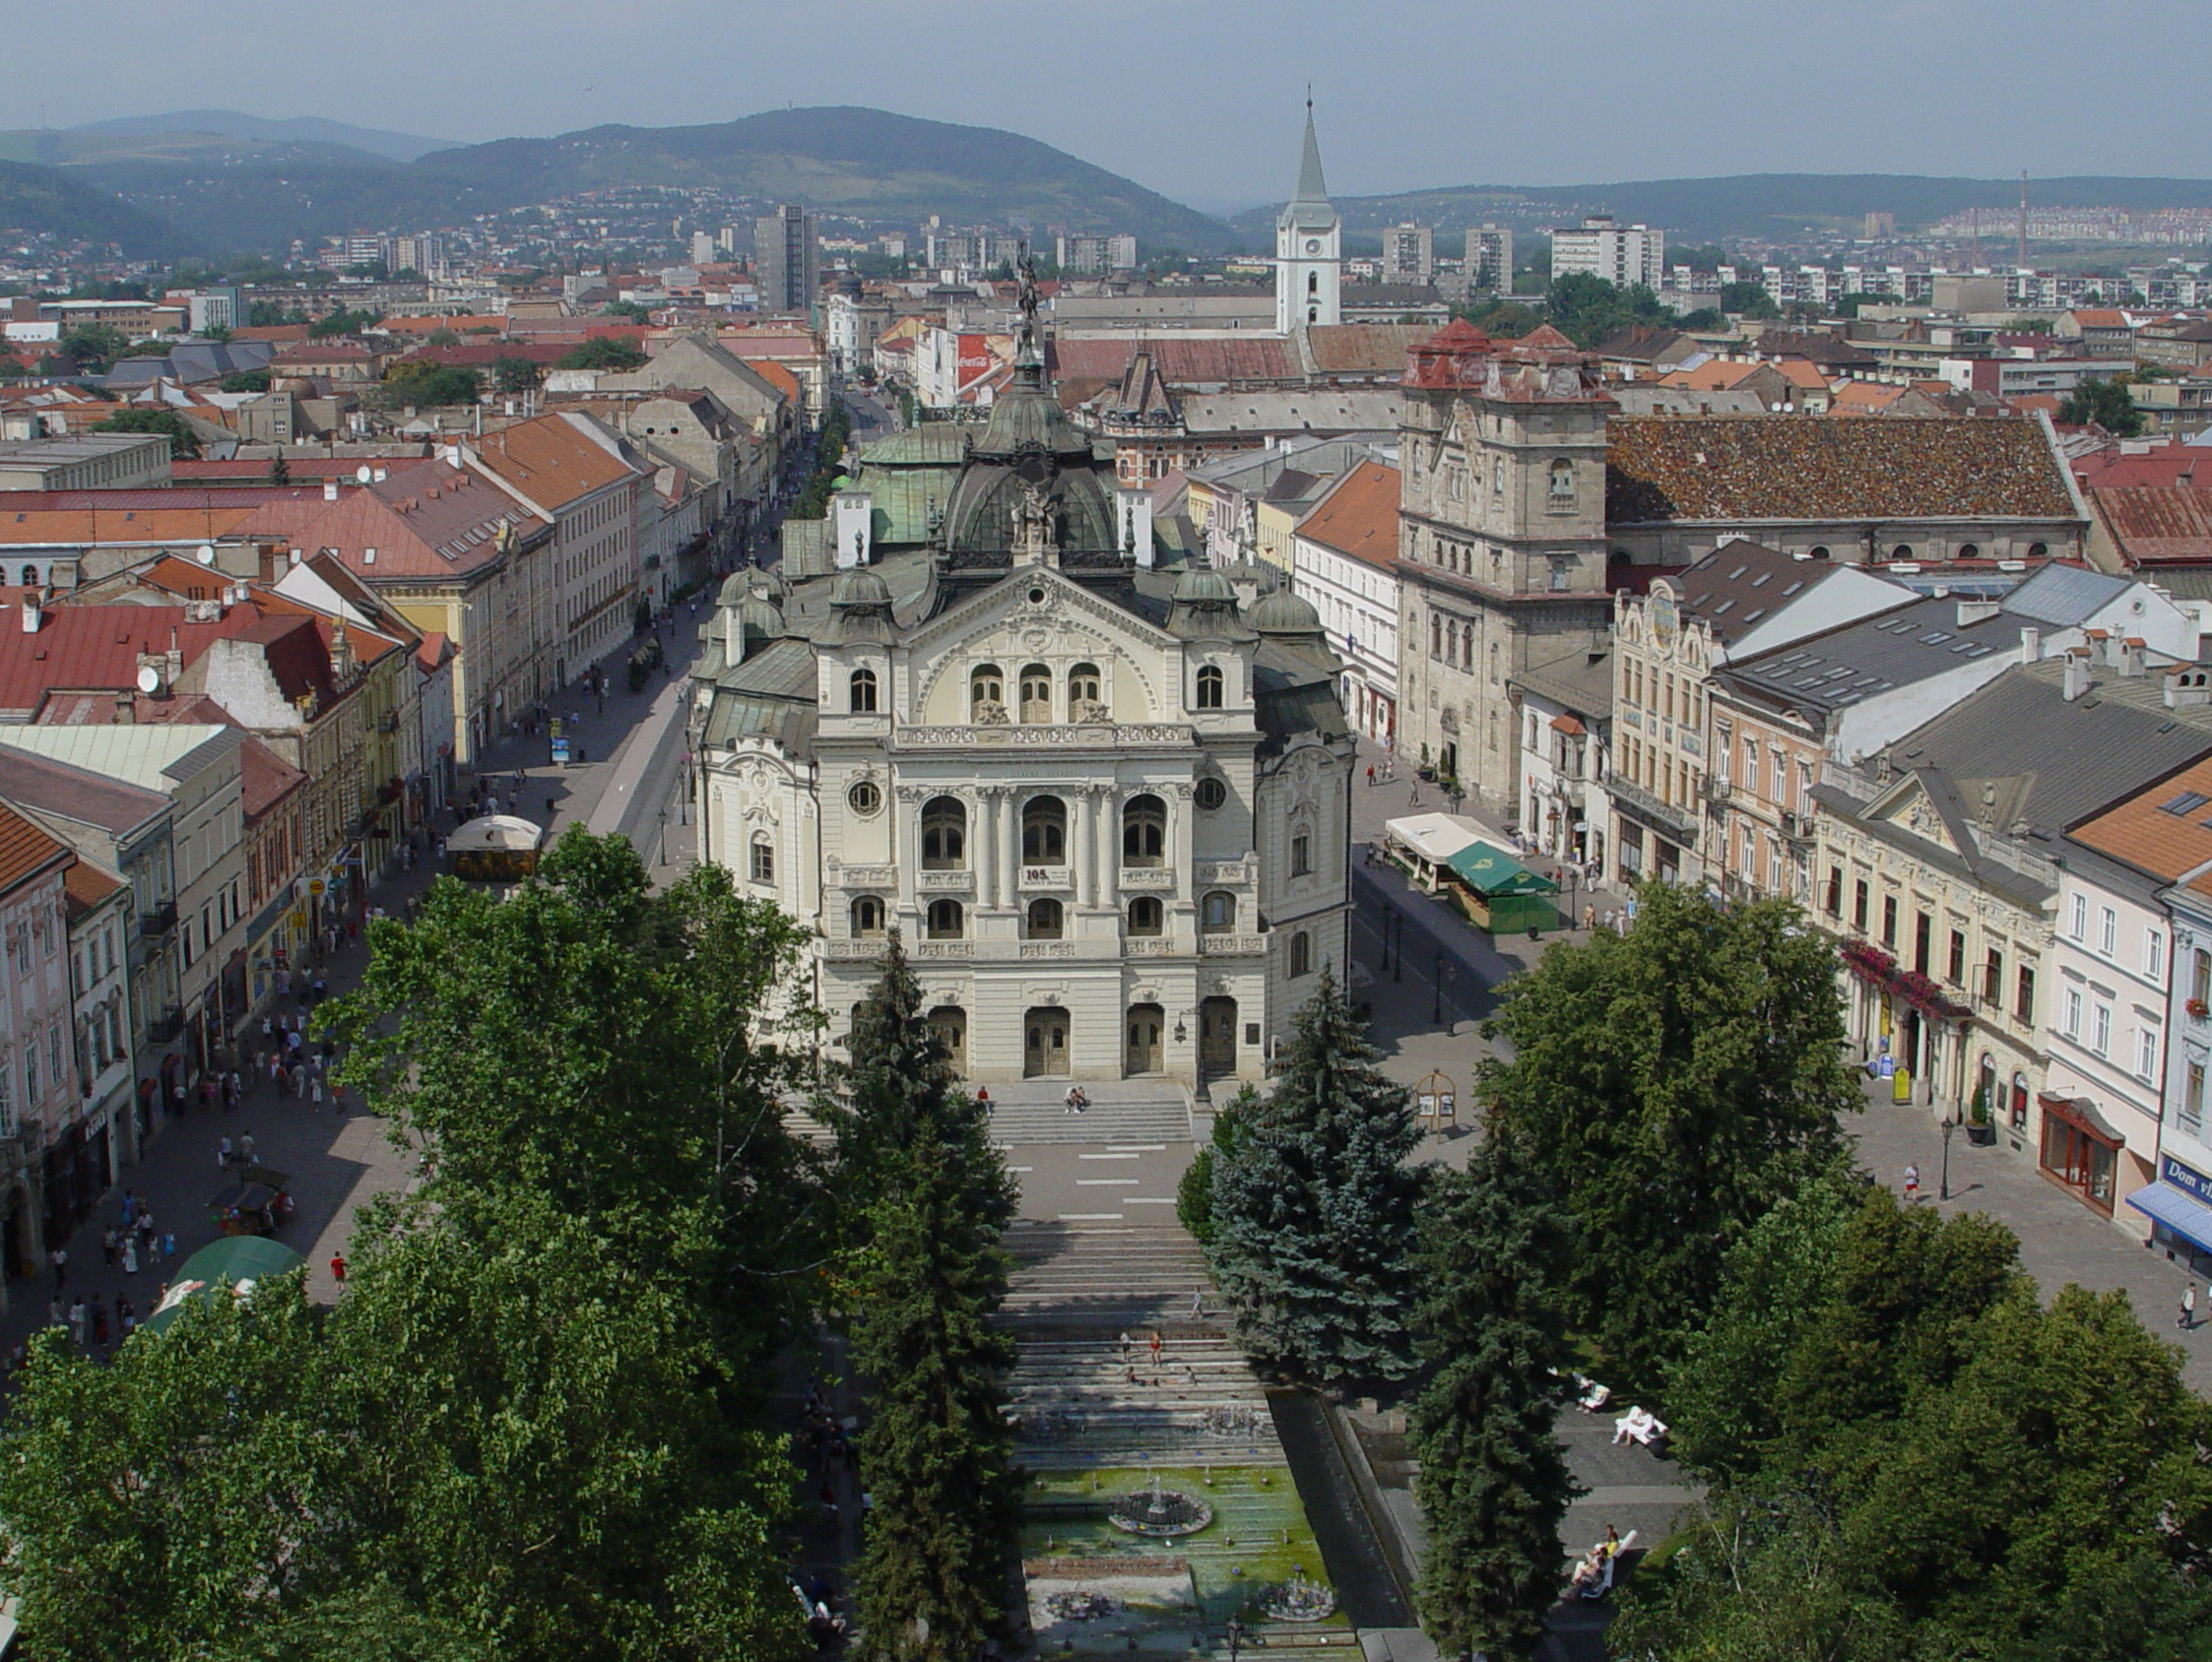 Foto: Kosice, State Theatre and Main Street - Copyright: Maros M r a z